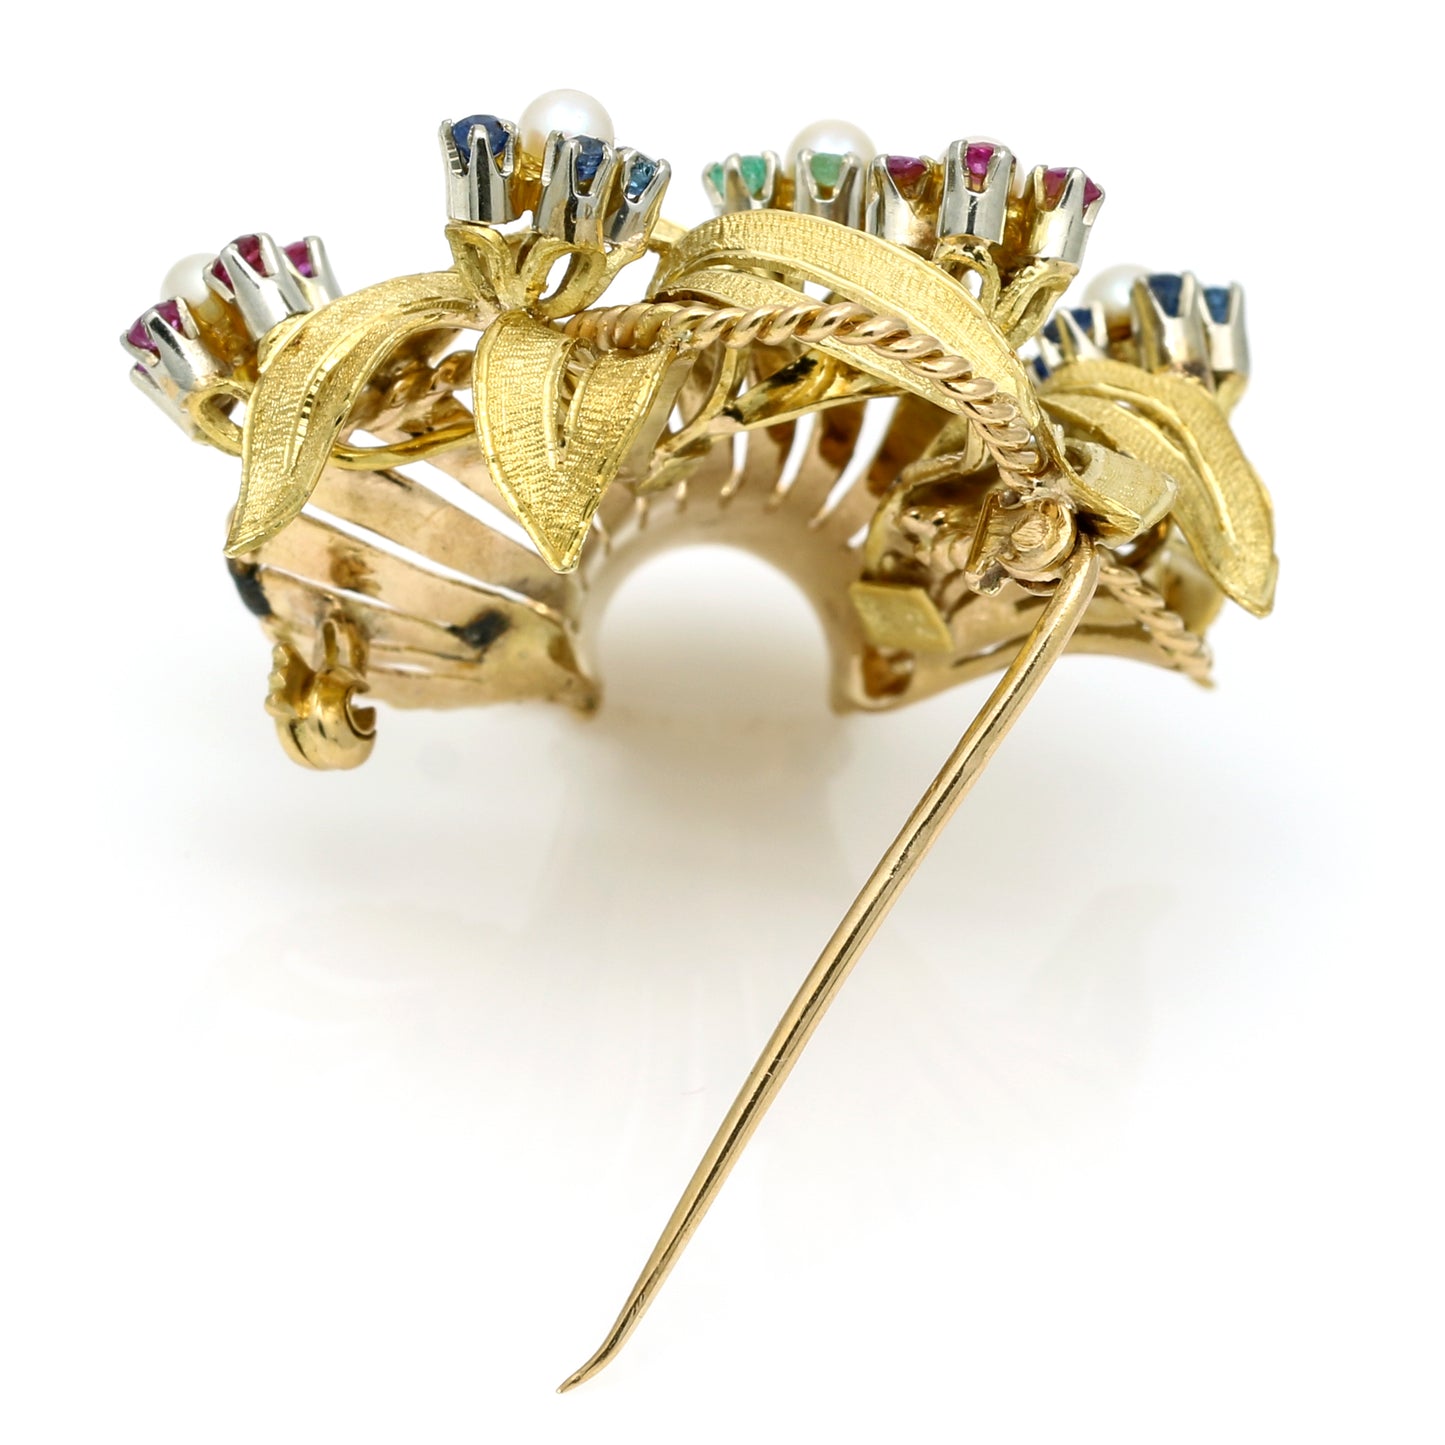 Vintage 18k Yellow Gold Brooch with Pearls, Rubies, Emeralds, and Sapphires - Signed V